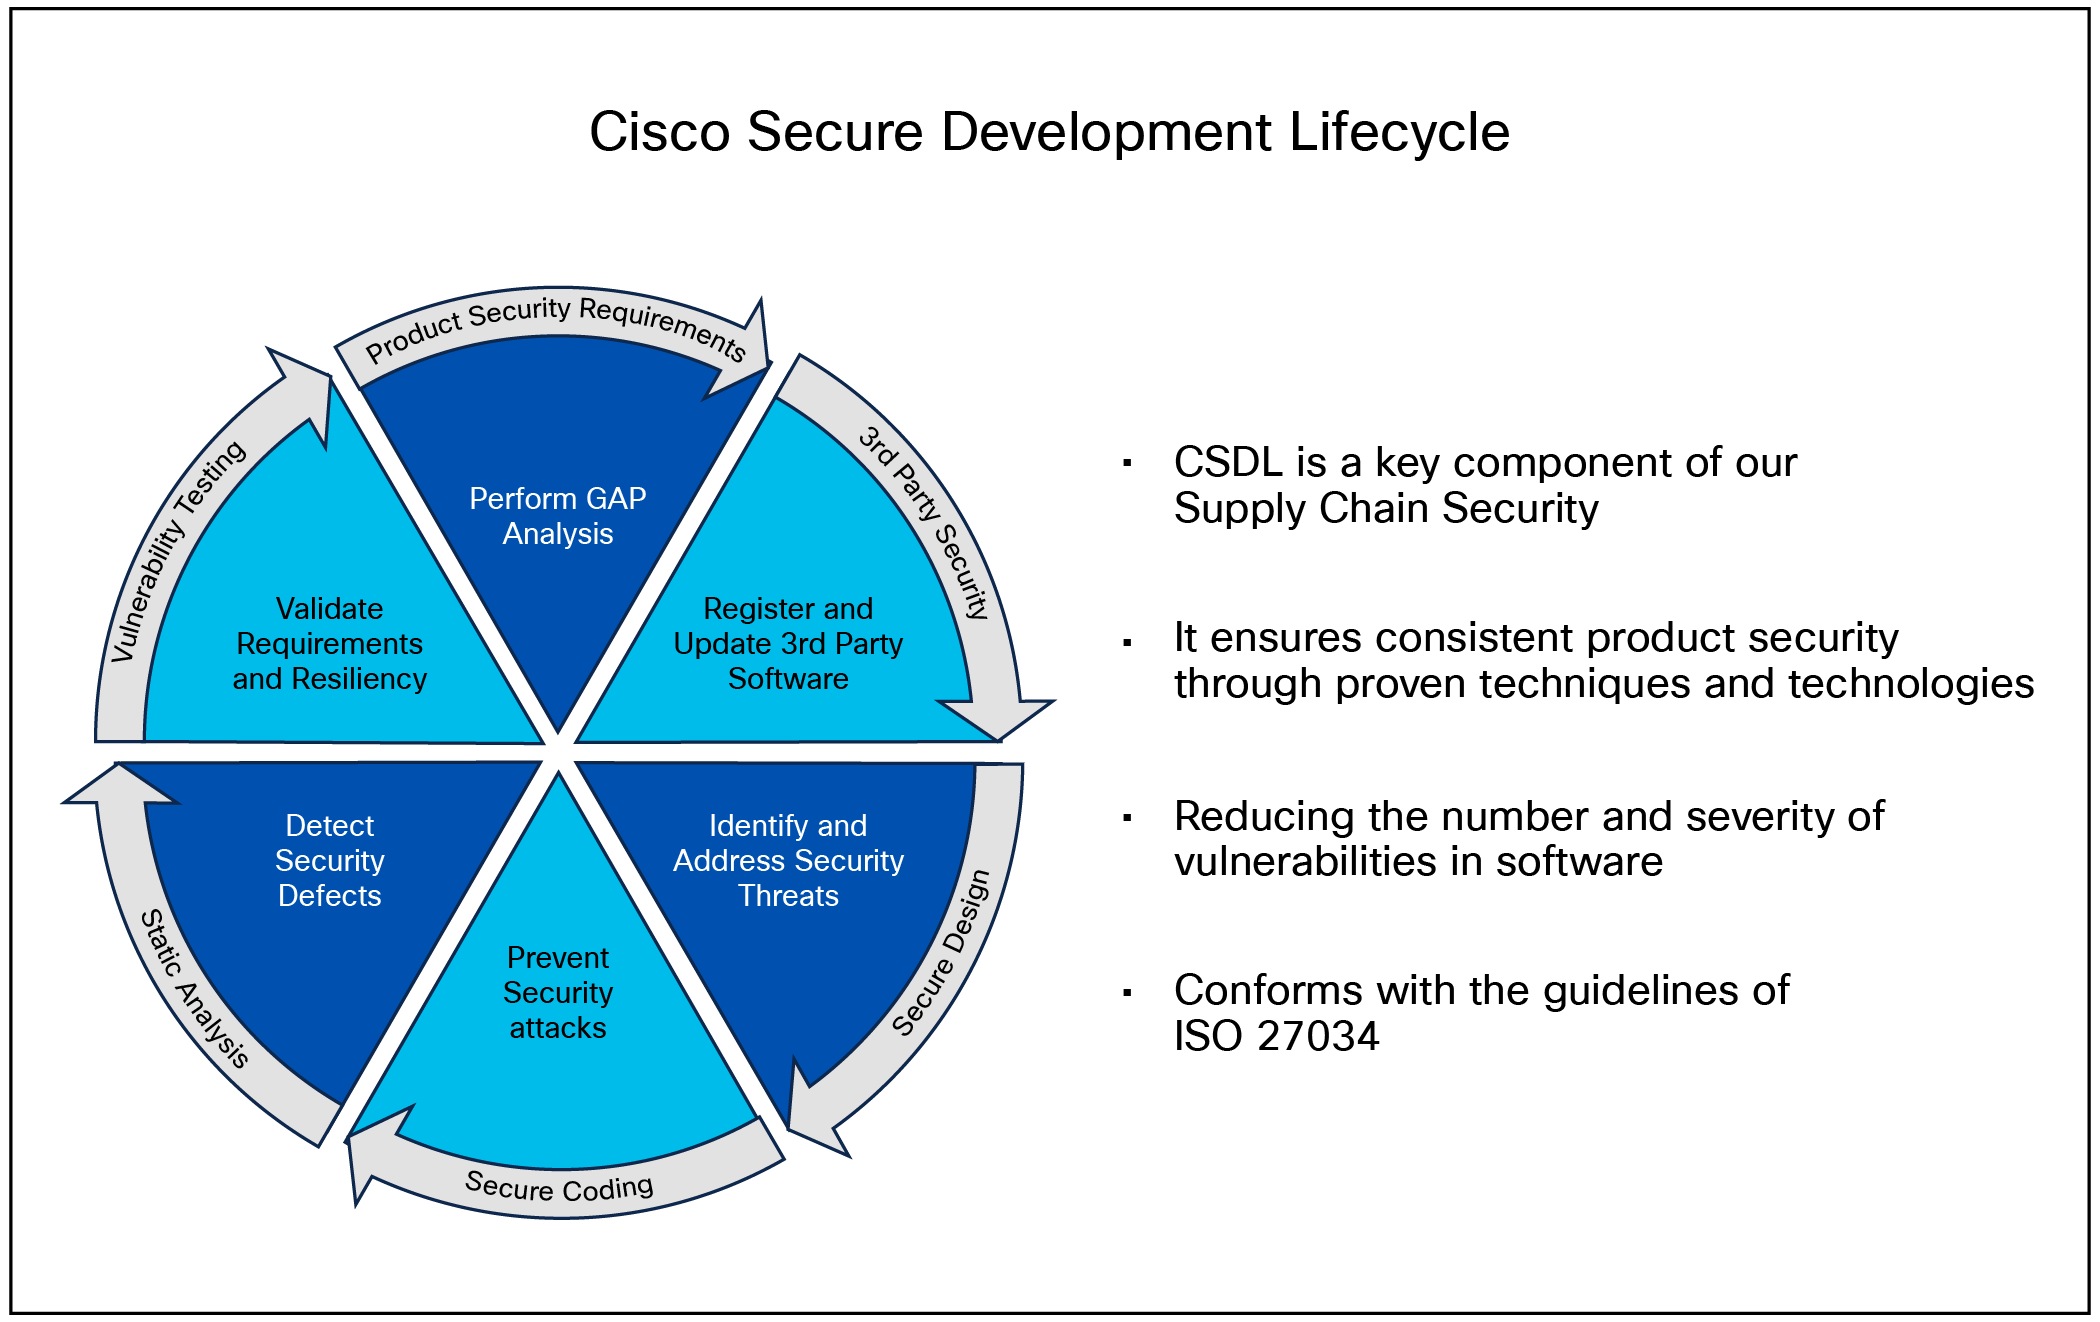 The Cisco Secure Product Development Lifecycle